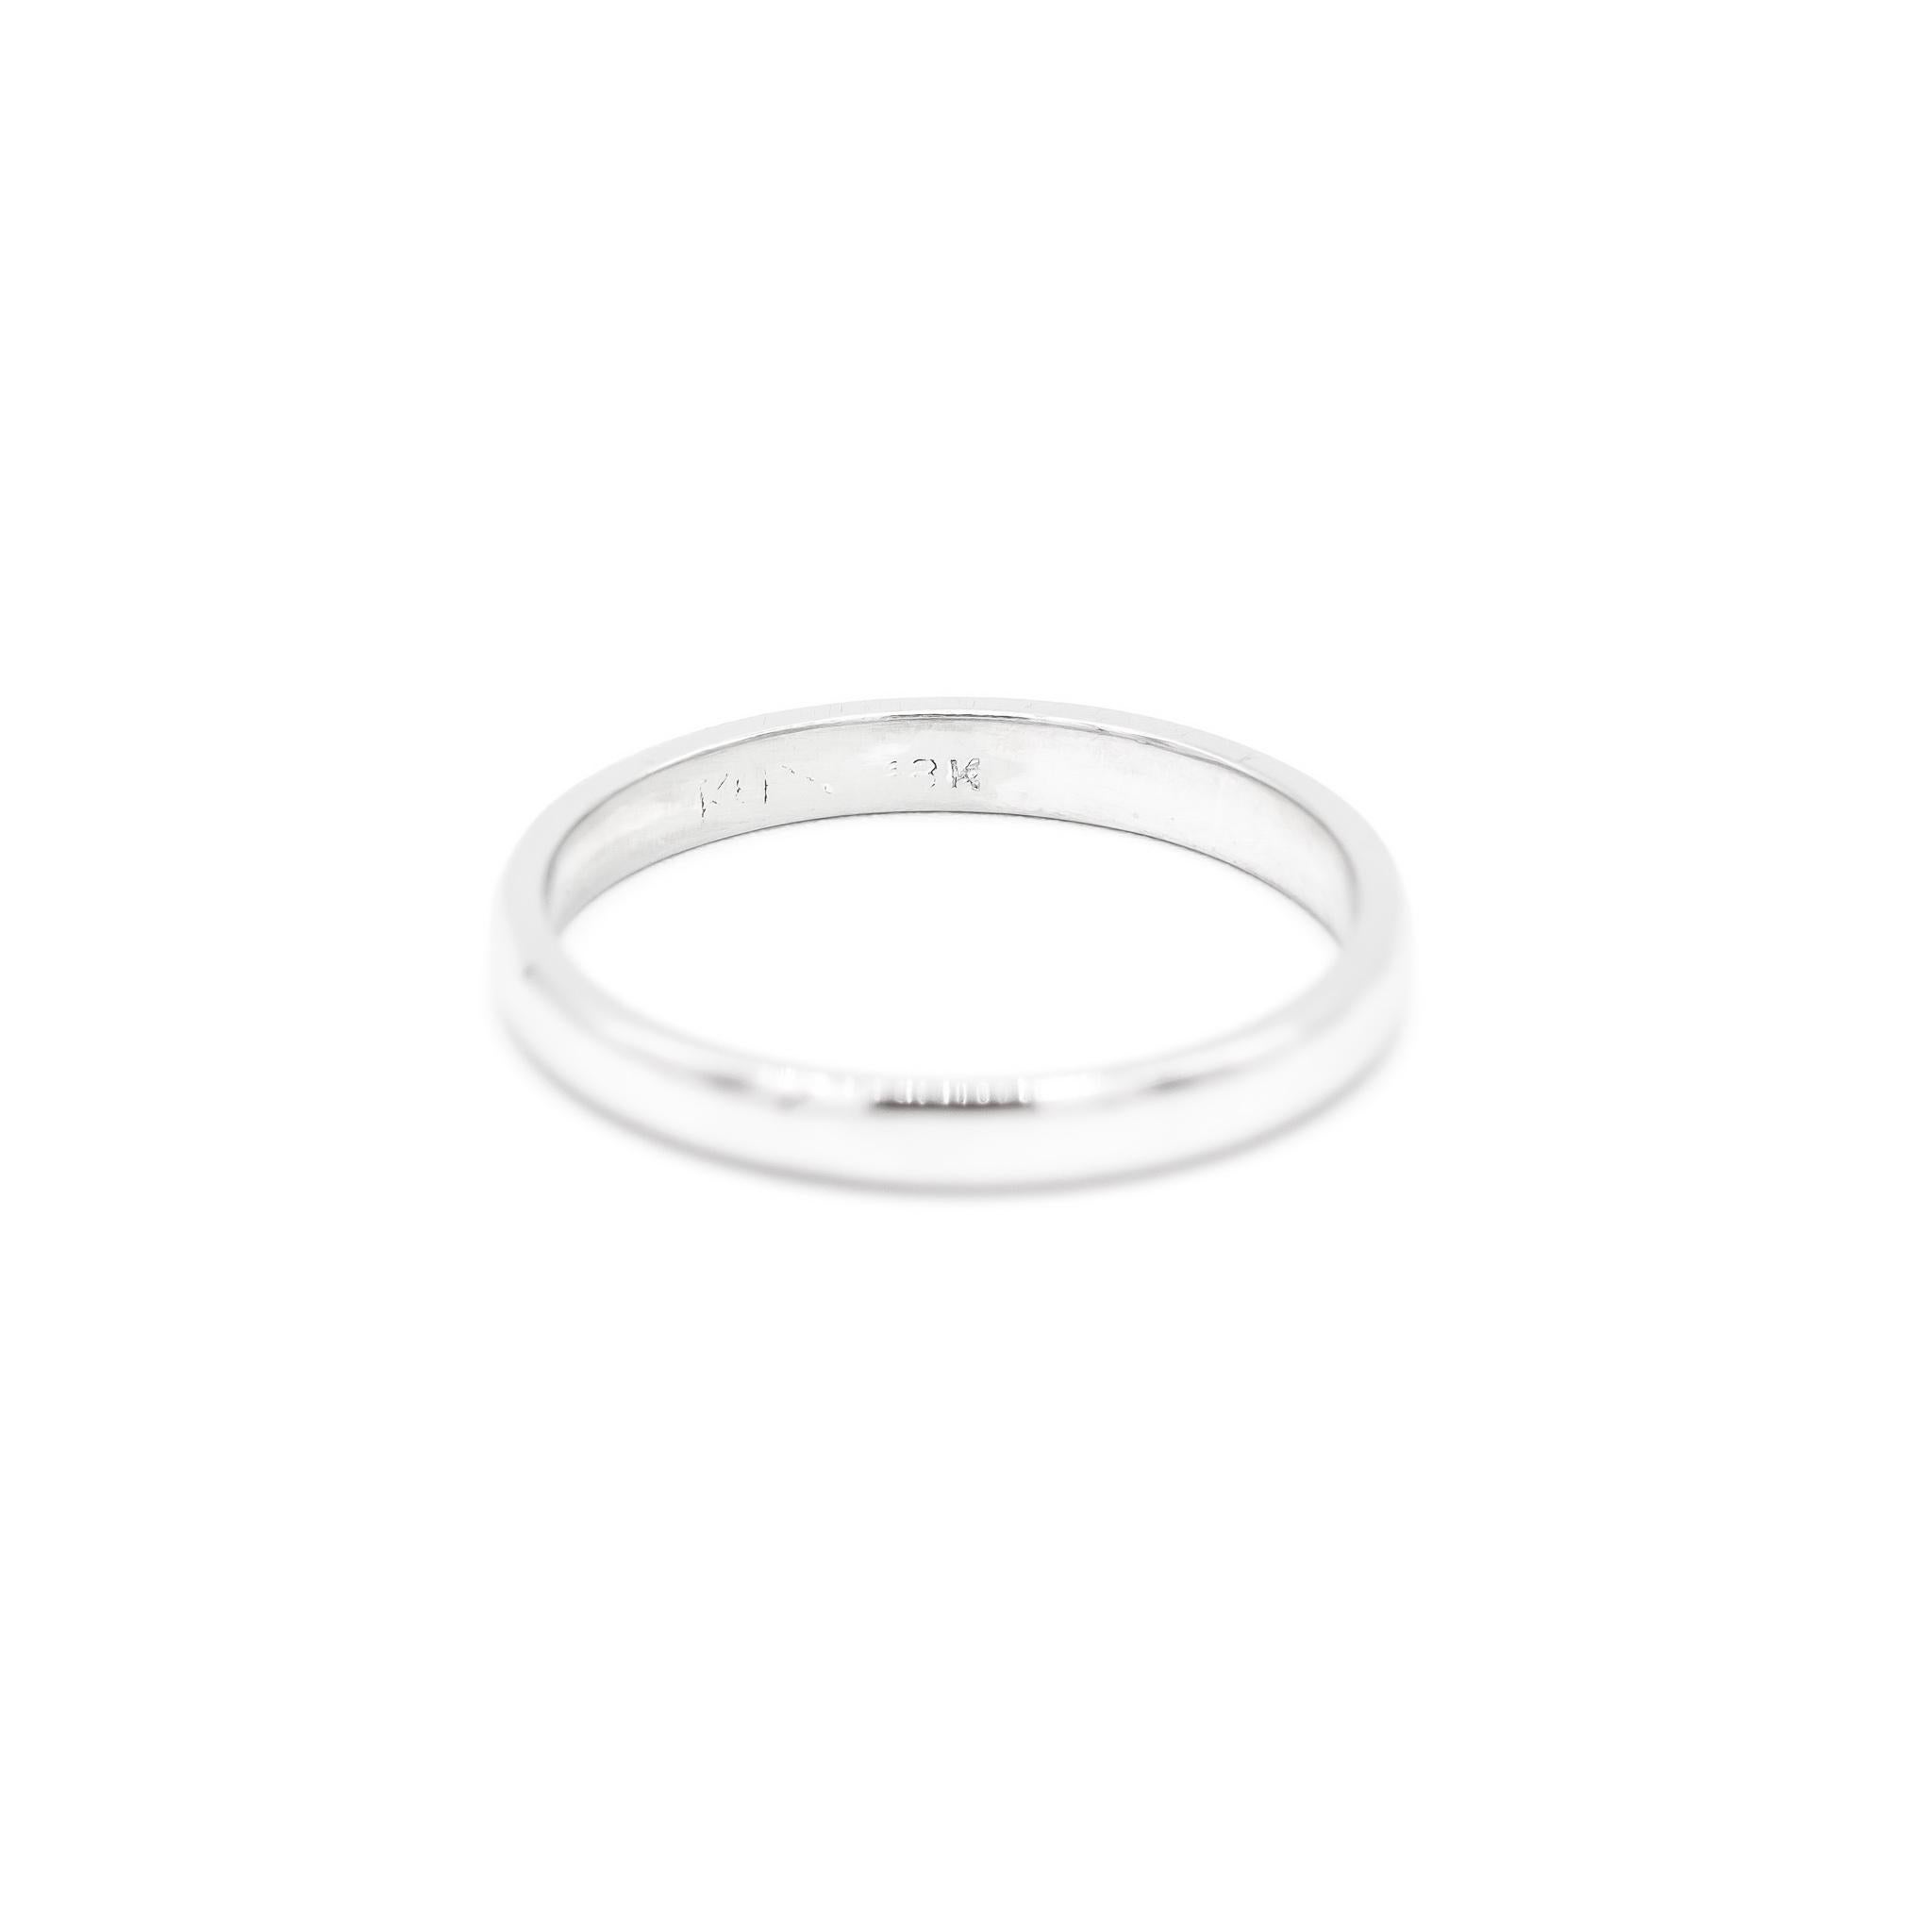 One lady's custom made polished rhodium plated 18K white gold, wedding band with a half-round shank. The band is a size 5.75. The band weighs a total of 2.10 grams. Engraved with 